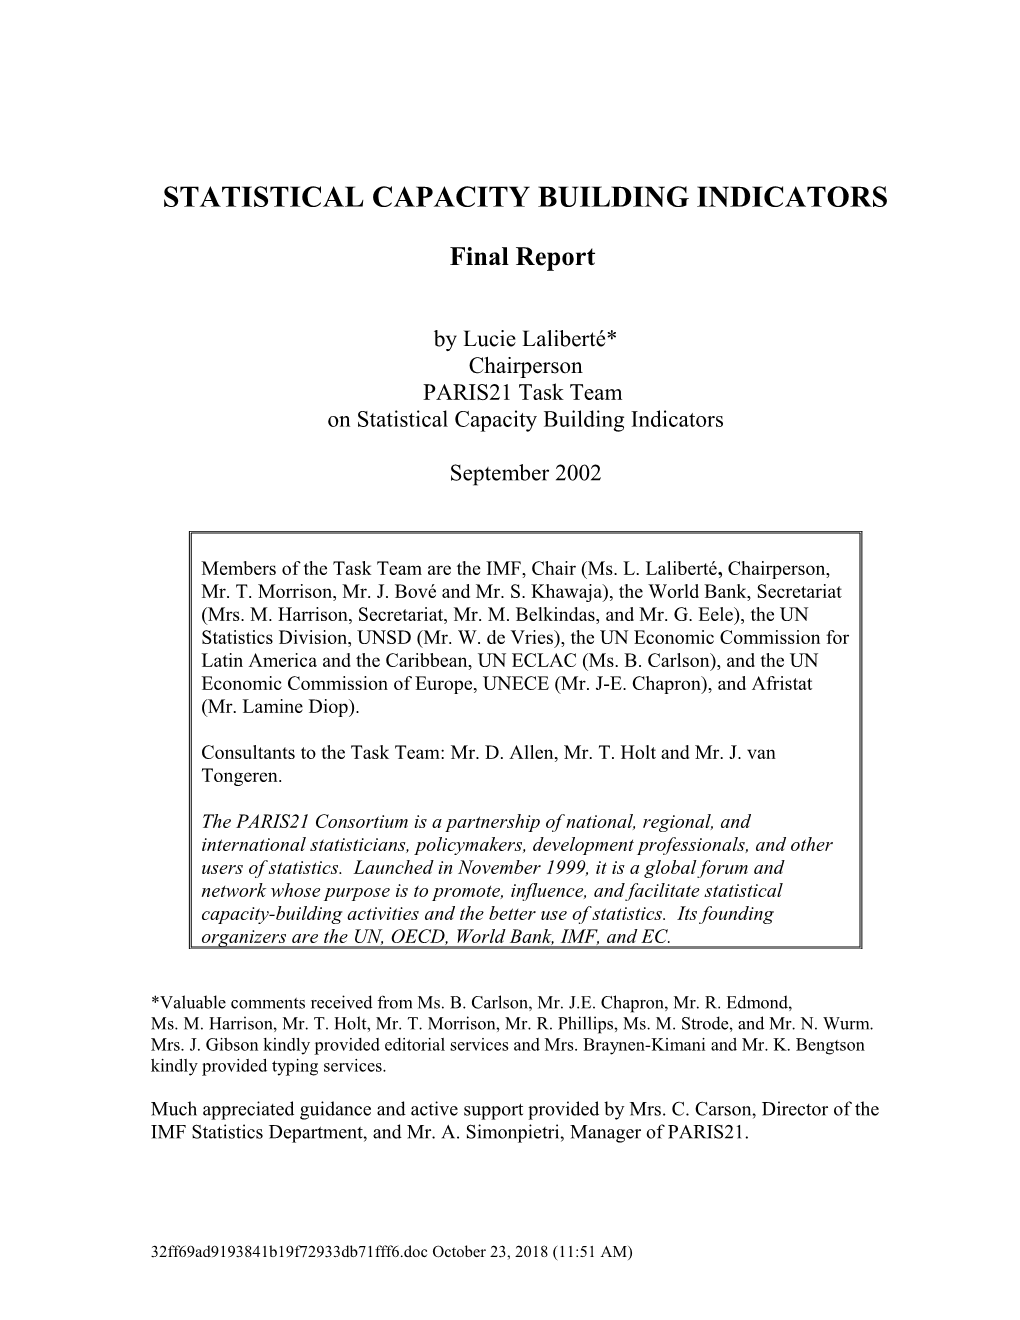 Program: Conference on Statistical Capacity Building Indicators